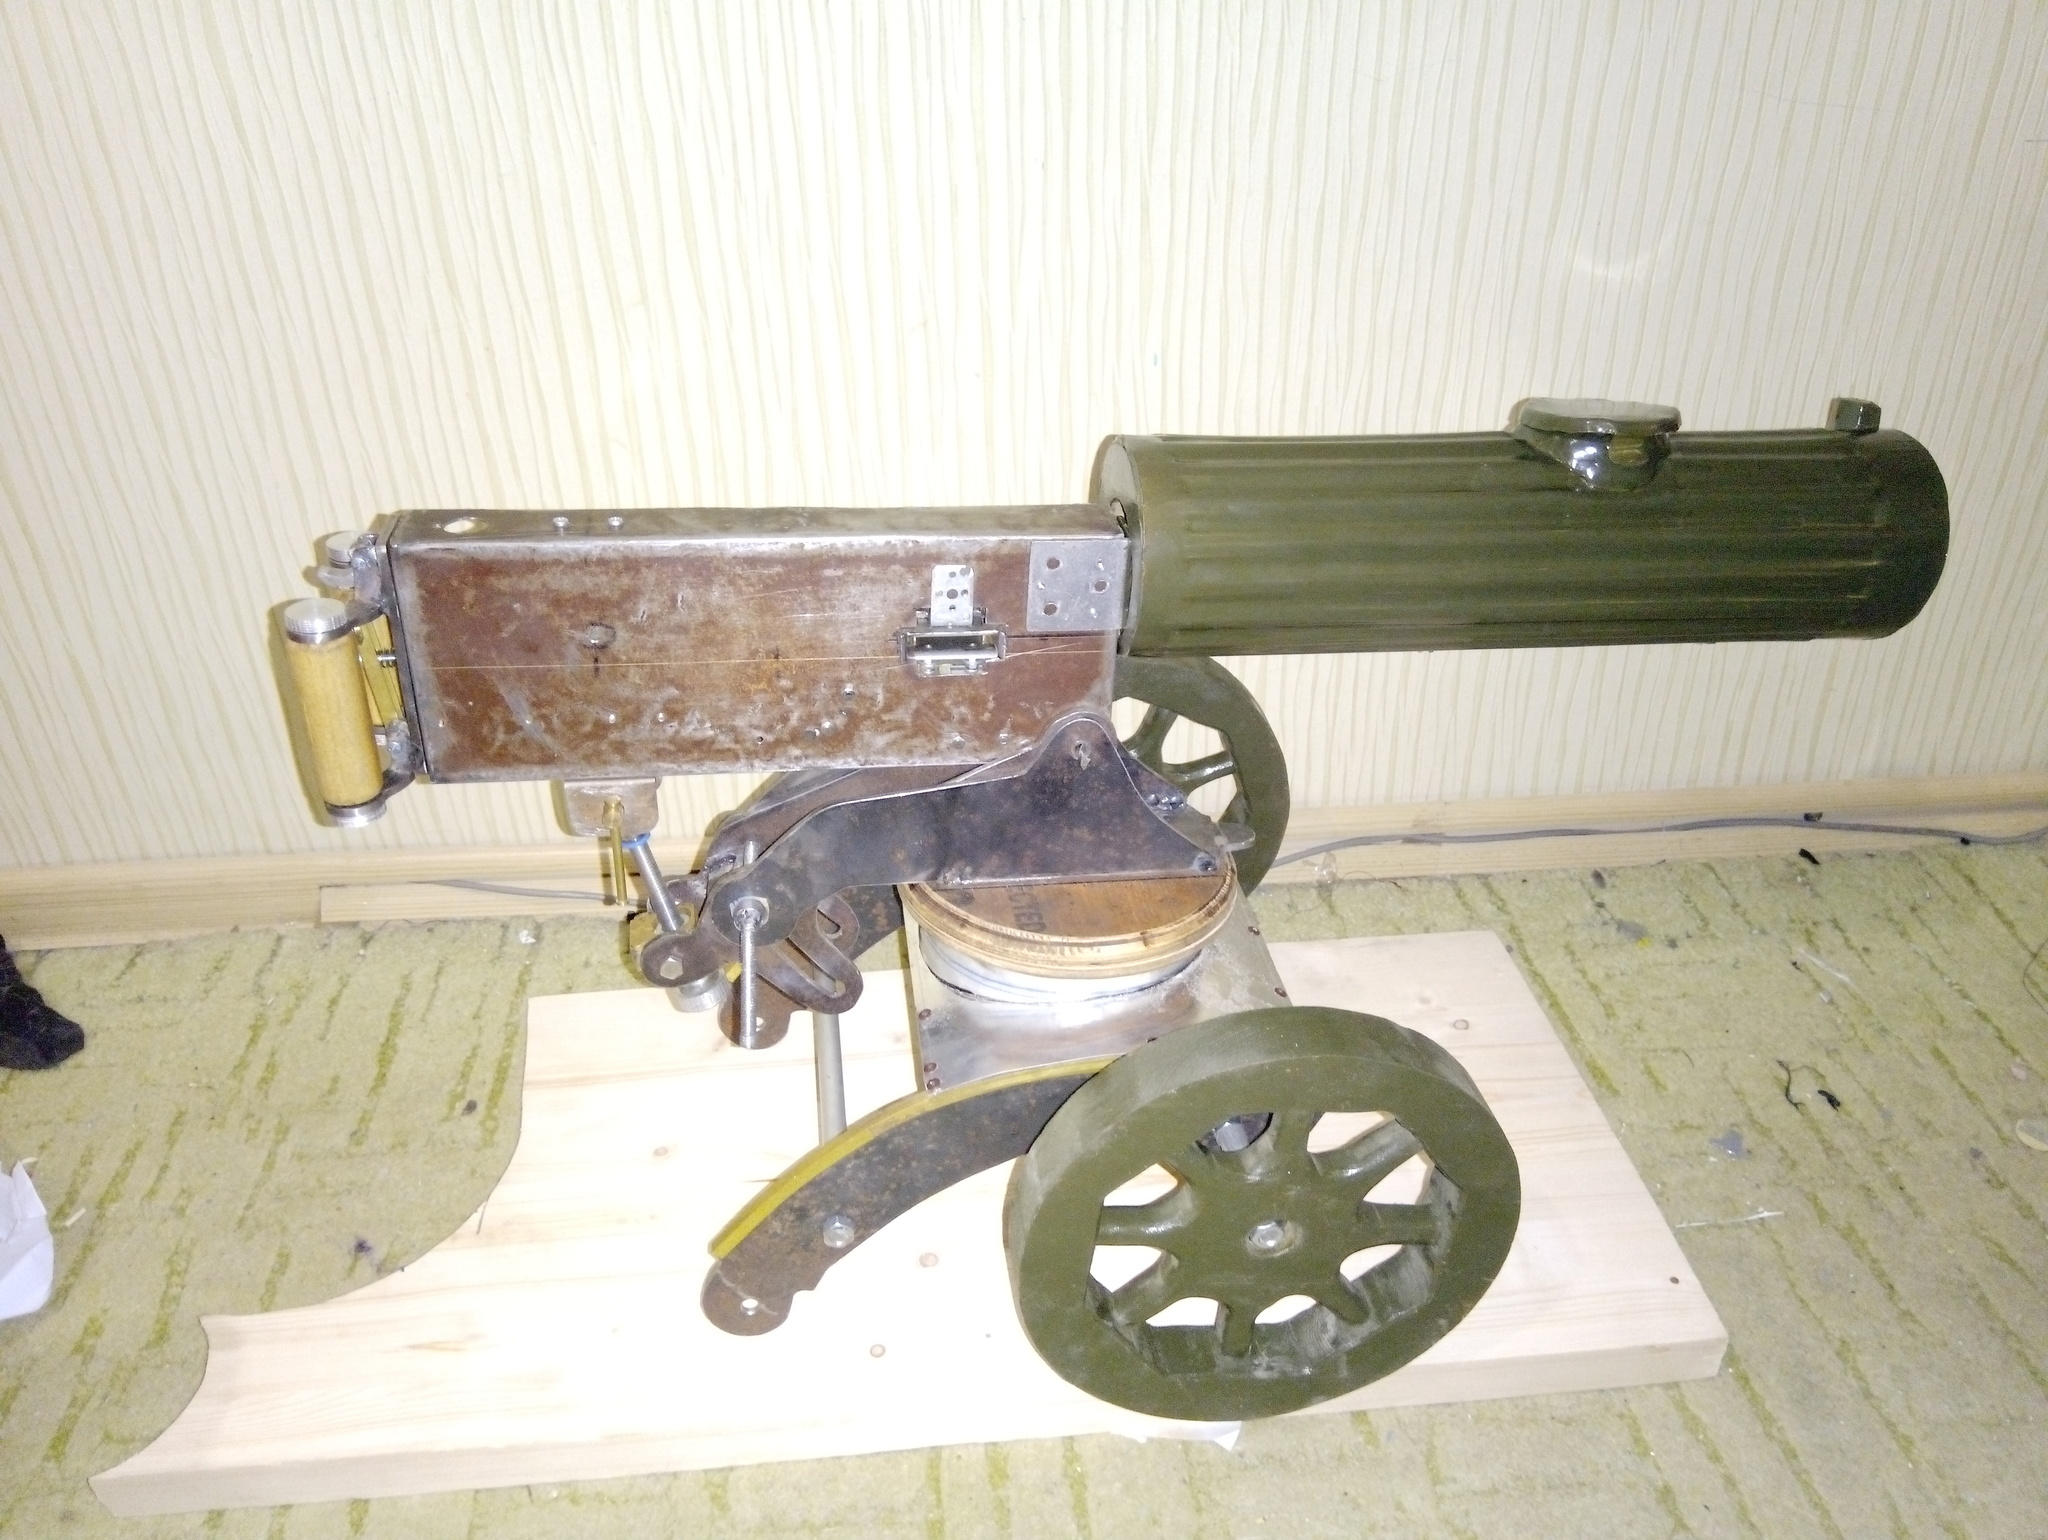 Machine gun Maxim pneumatic, model 1 to 1.5 - My, Needlework with process, Needlework, With your own hands, Models, Pneumatics, Airguns, Maxim machine gun, Homemade, Video, Longpost